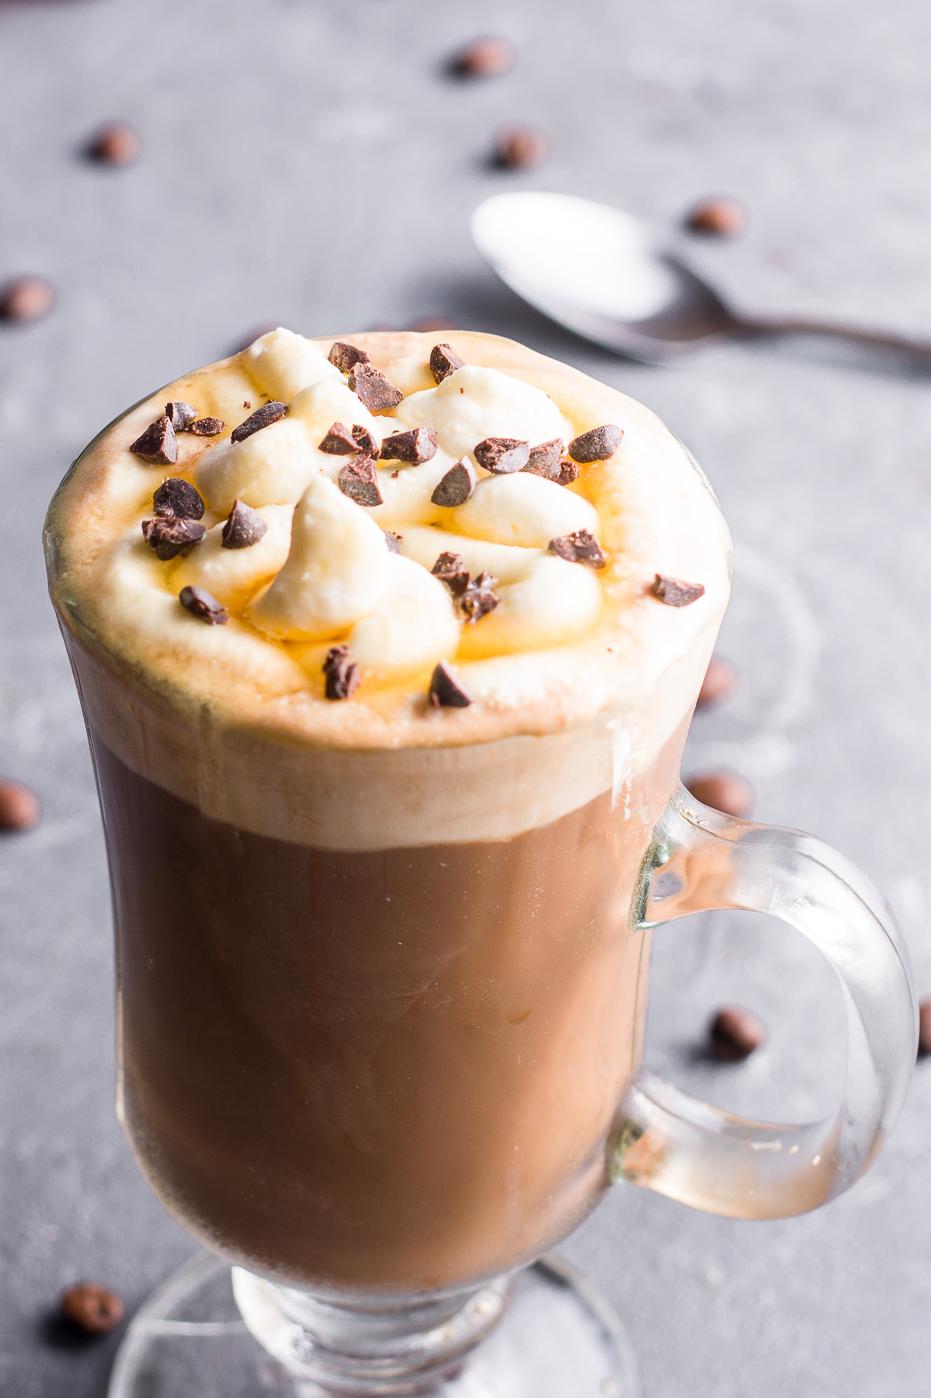  All hail the glorious combination of coffee and chocolate